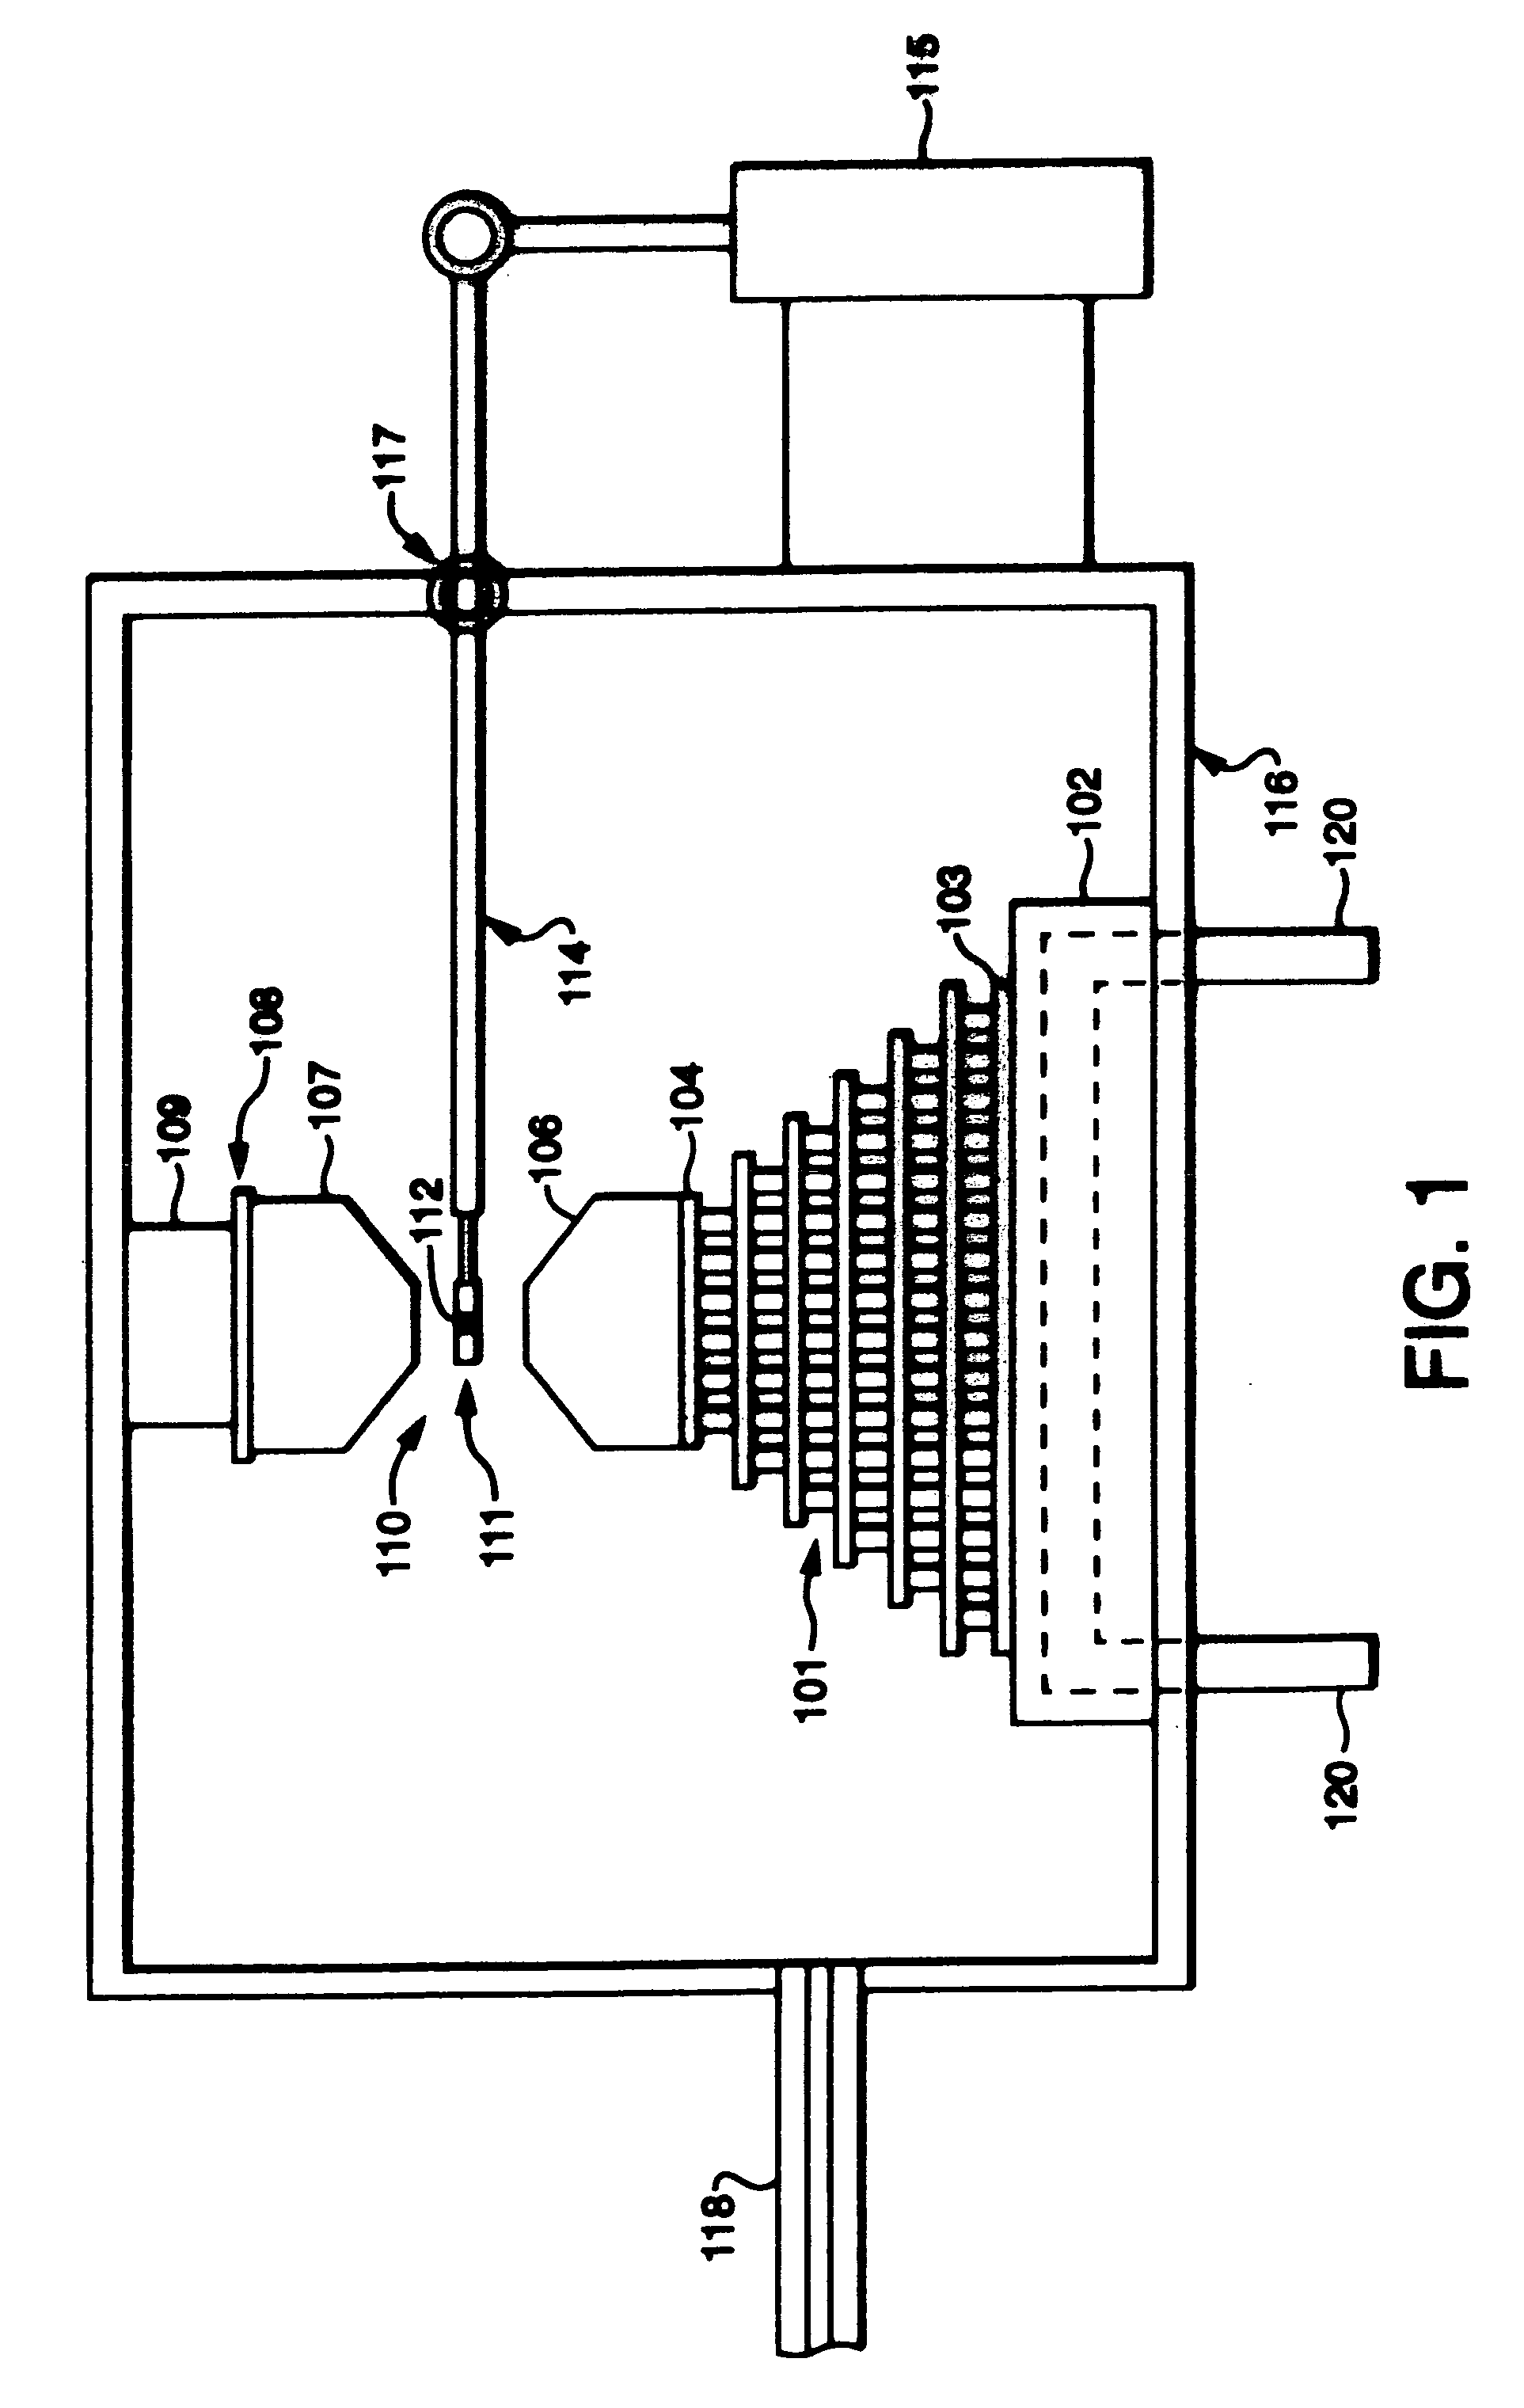 Peltier based freeze-thaw valves and method of use